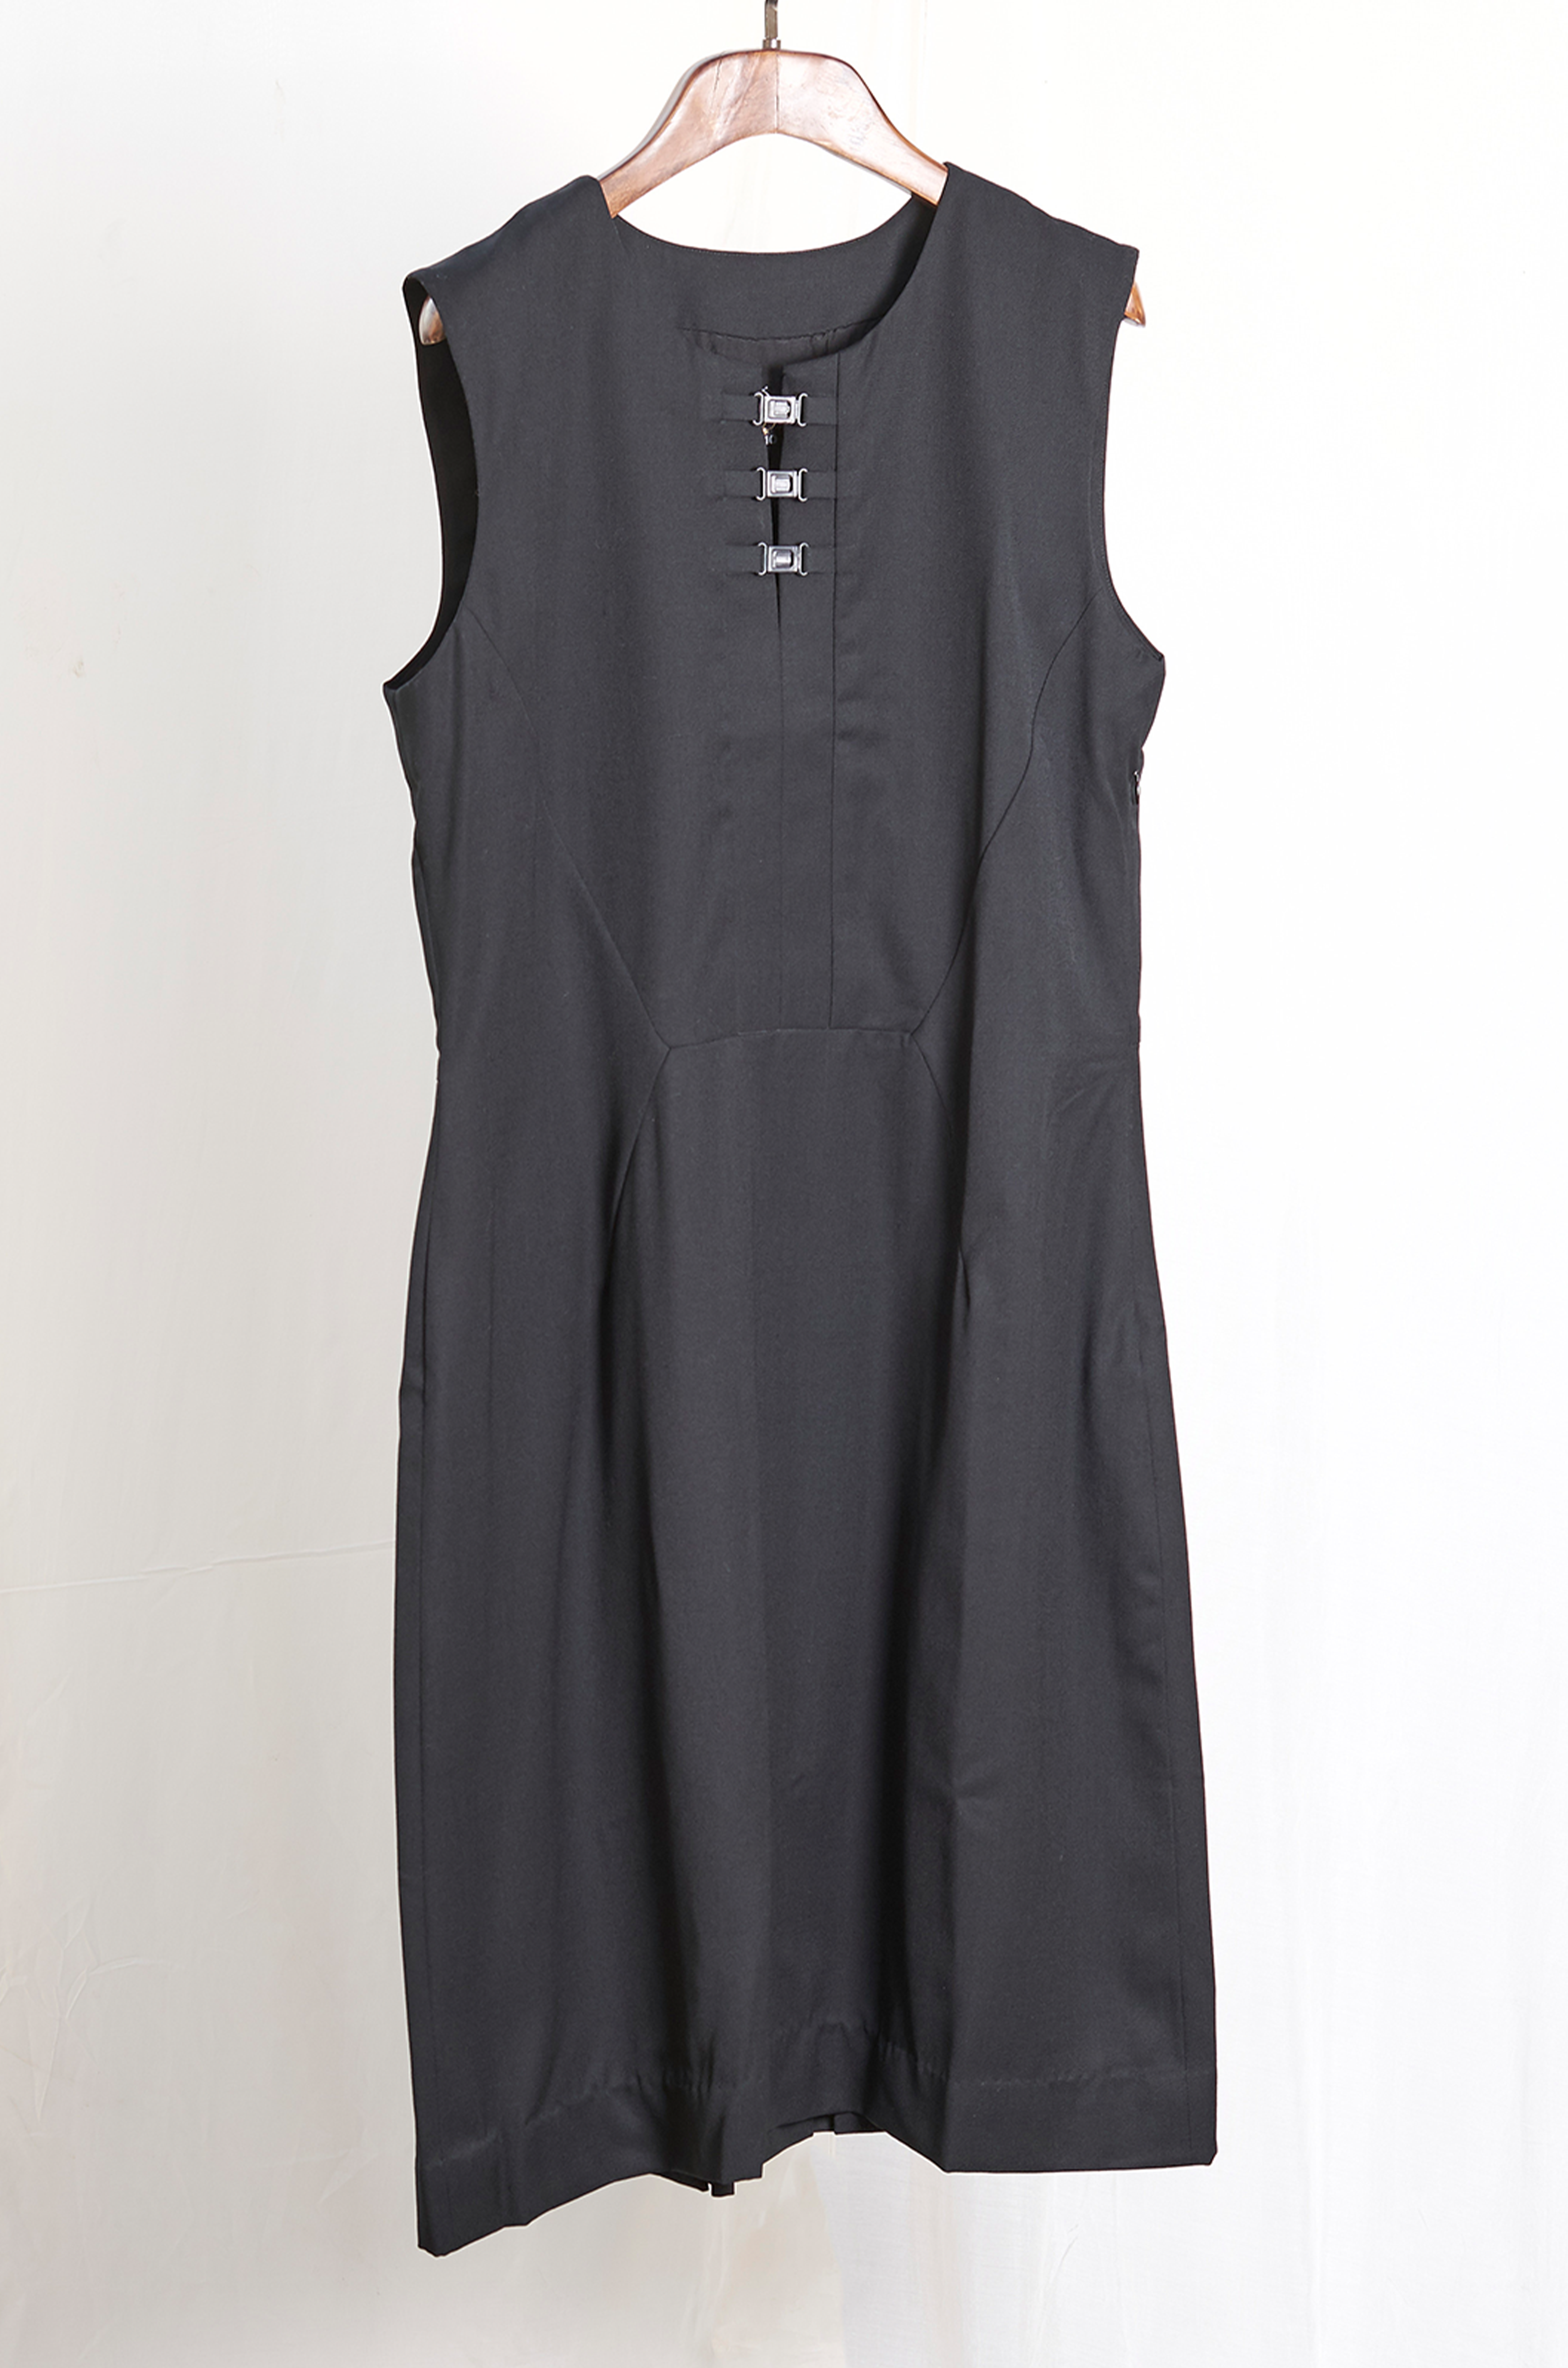 Black wool fitted dress